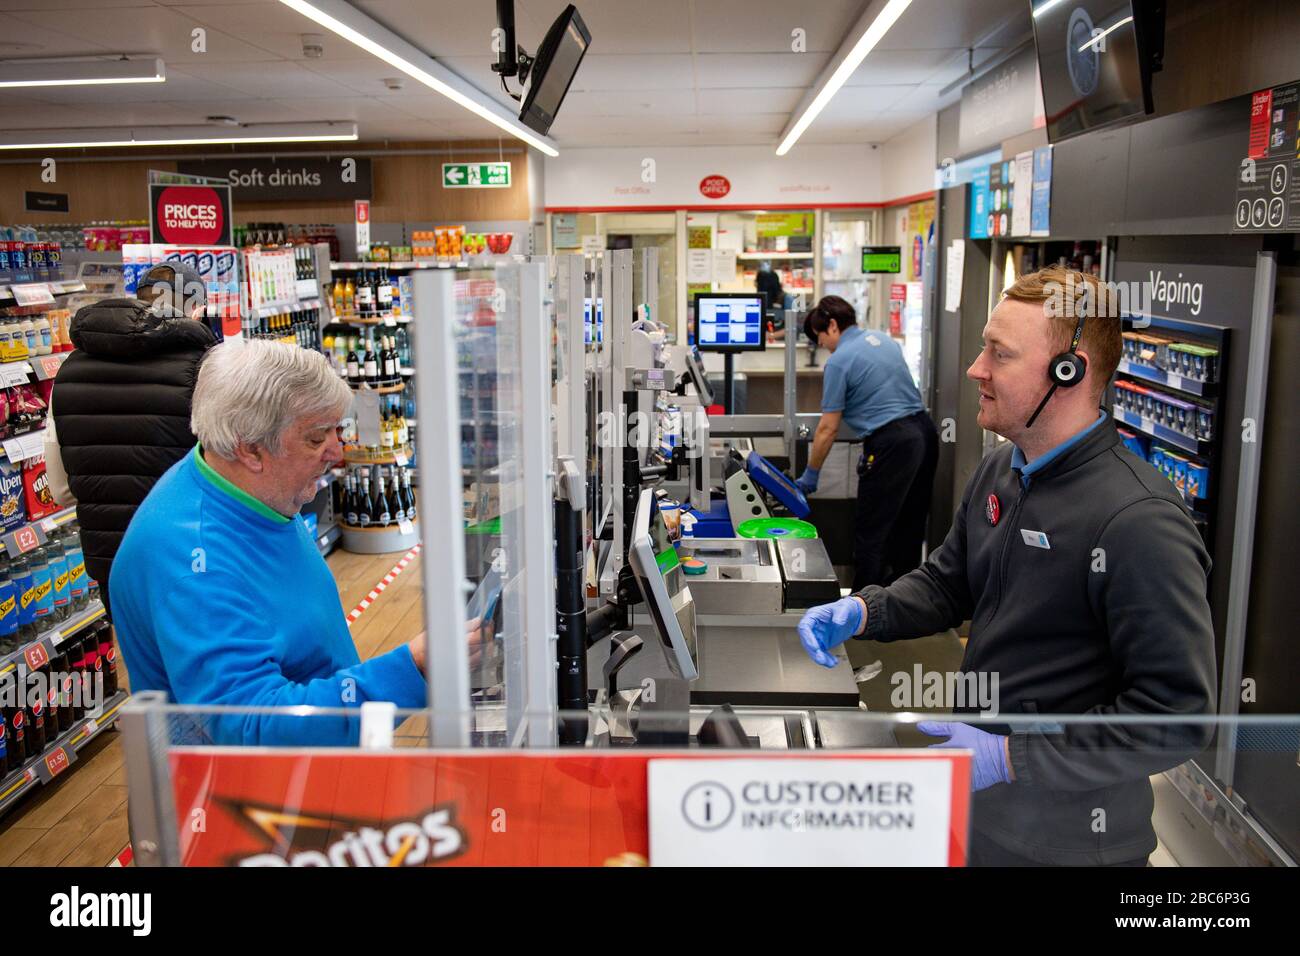 A clear screen divides employees and customers in store at a Co-op shop in Bromsgrove, Worcestershire. Stock Photo